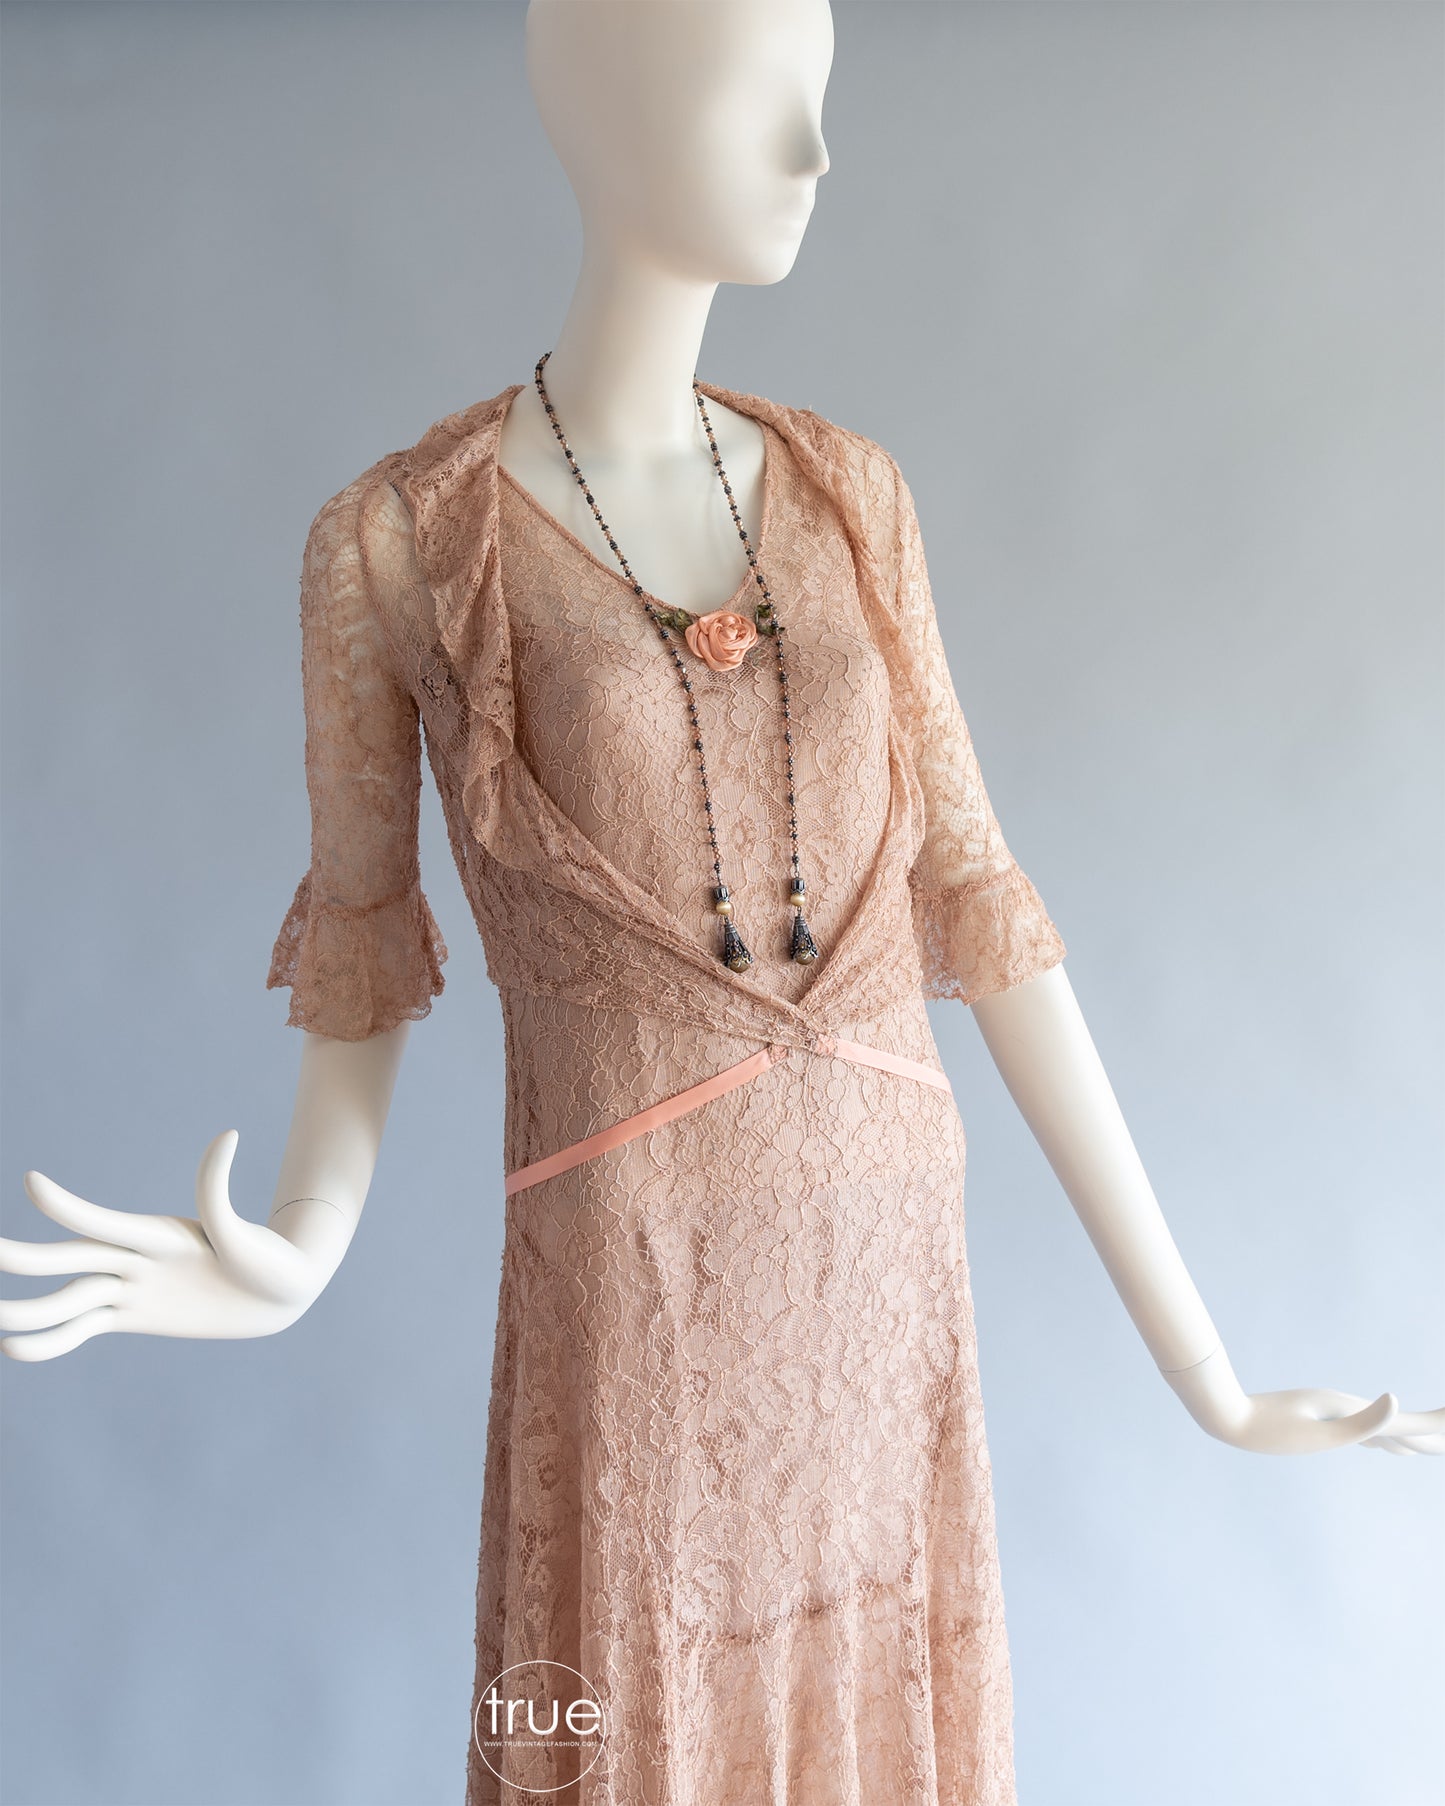 vintage 1920's - 1930's dress ...lovely nude/taupe-ish lace dress with silk flounced slip & jacket